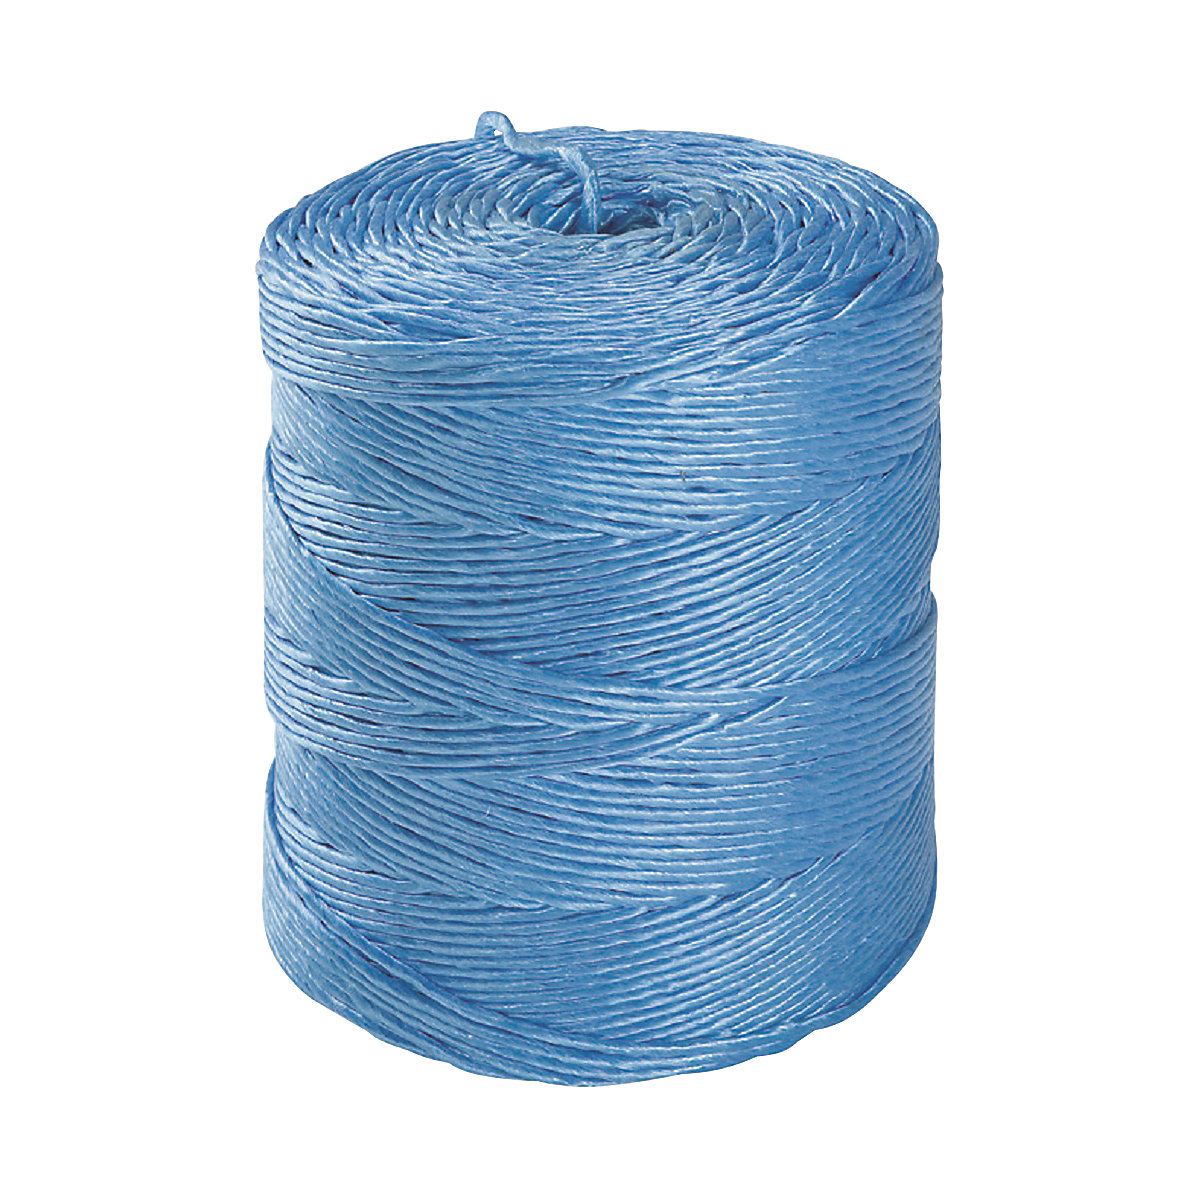 Strapping twine – HSM